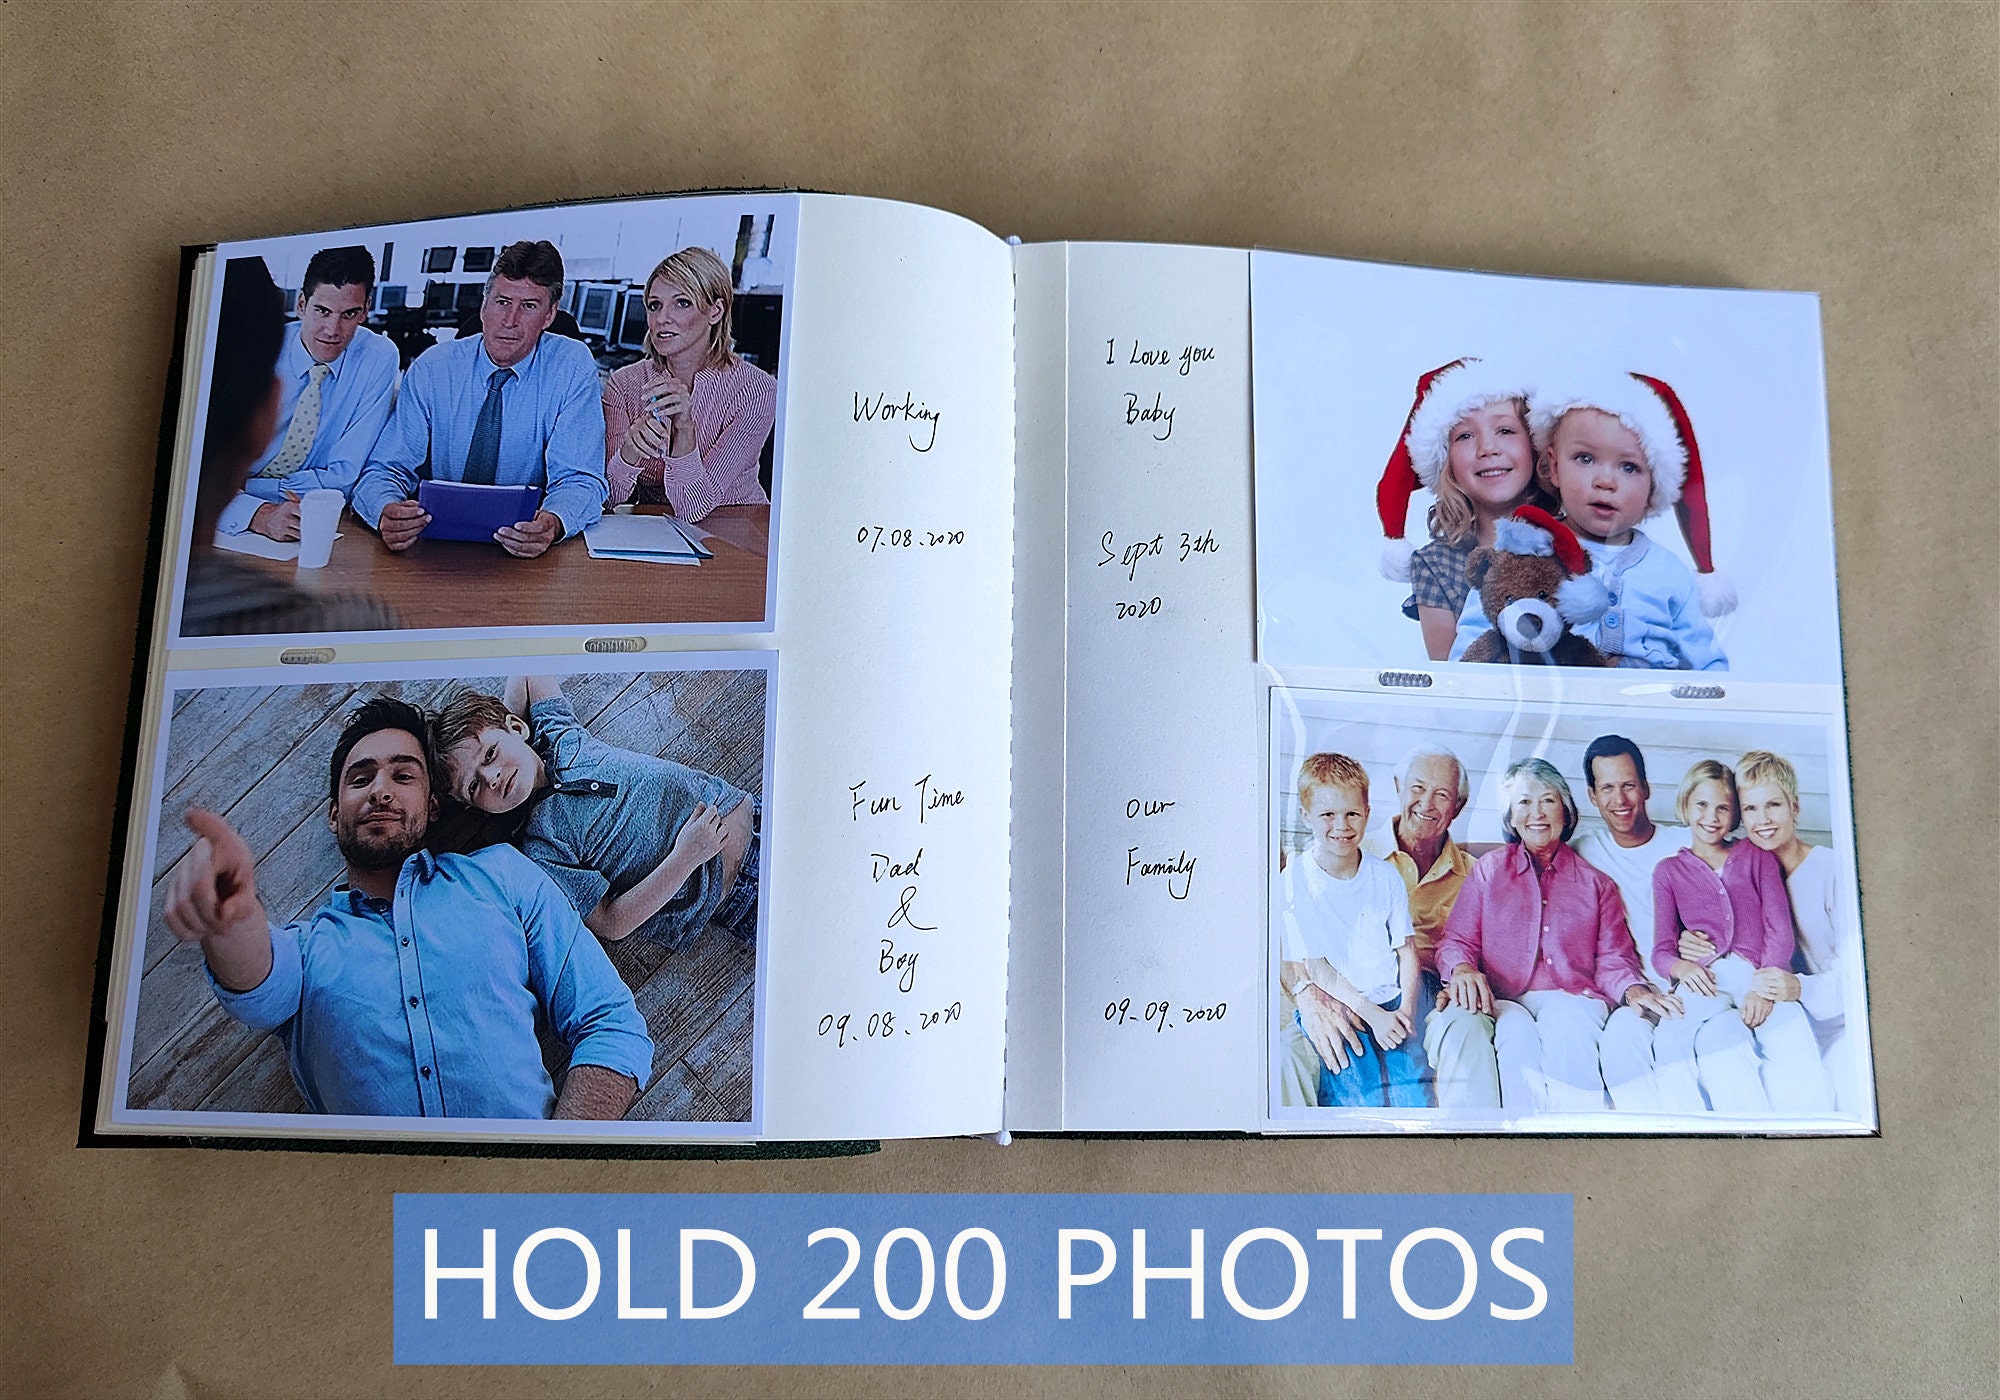 Personalized Leather Photo Album Fit for 4x6 or 5x7 Photos, Custom